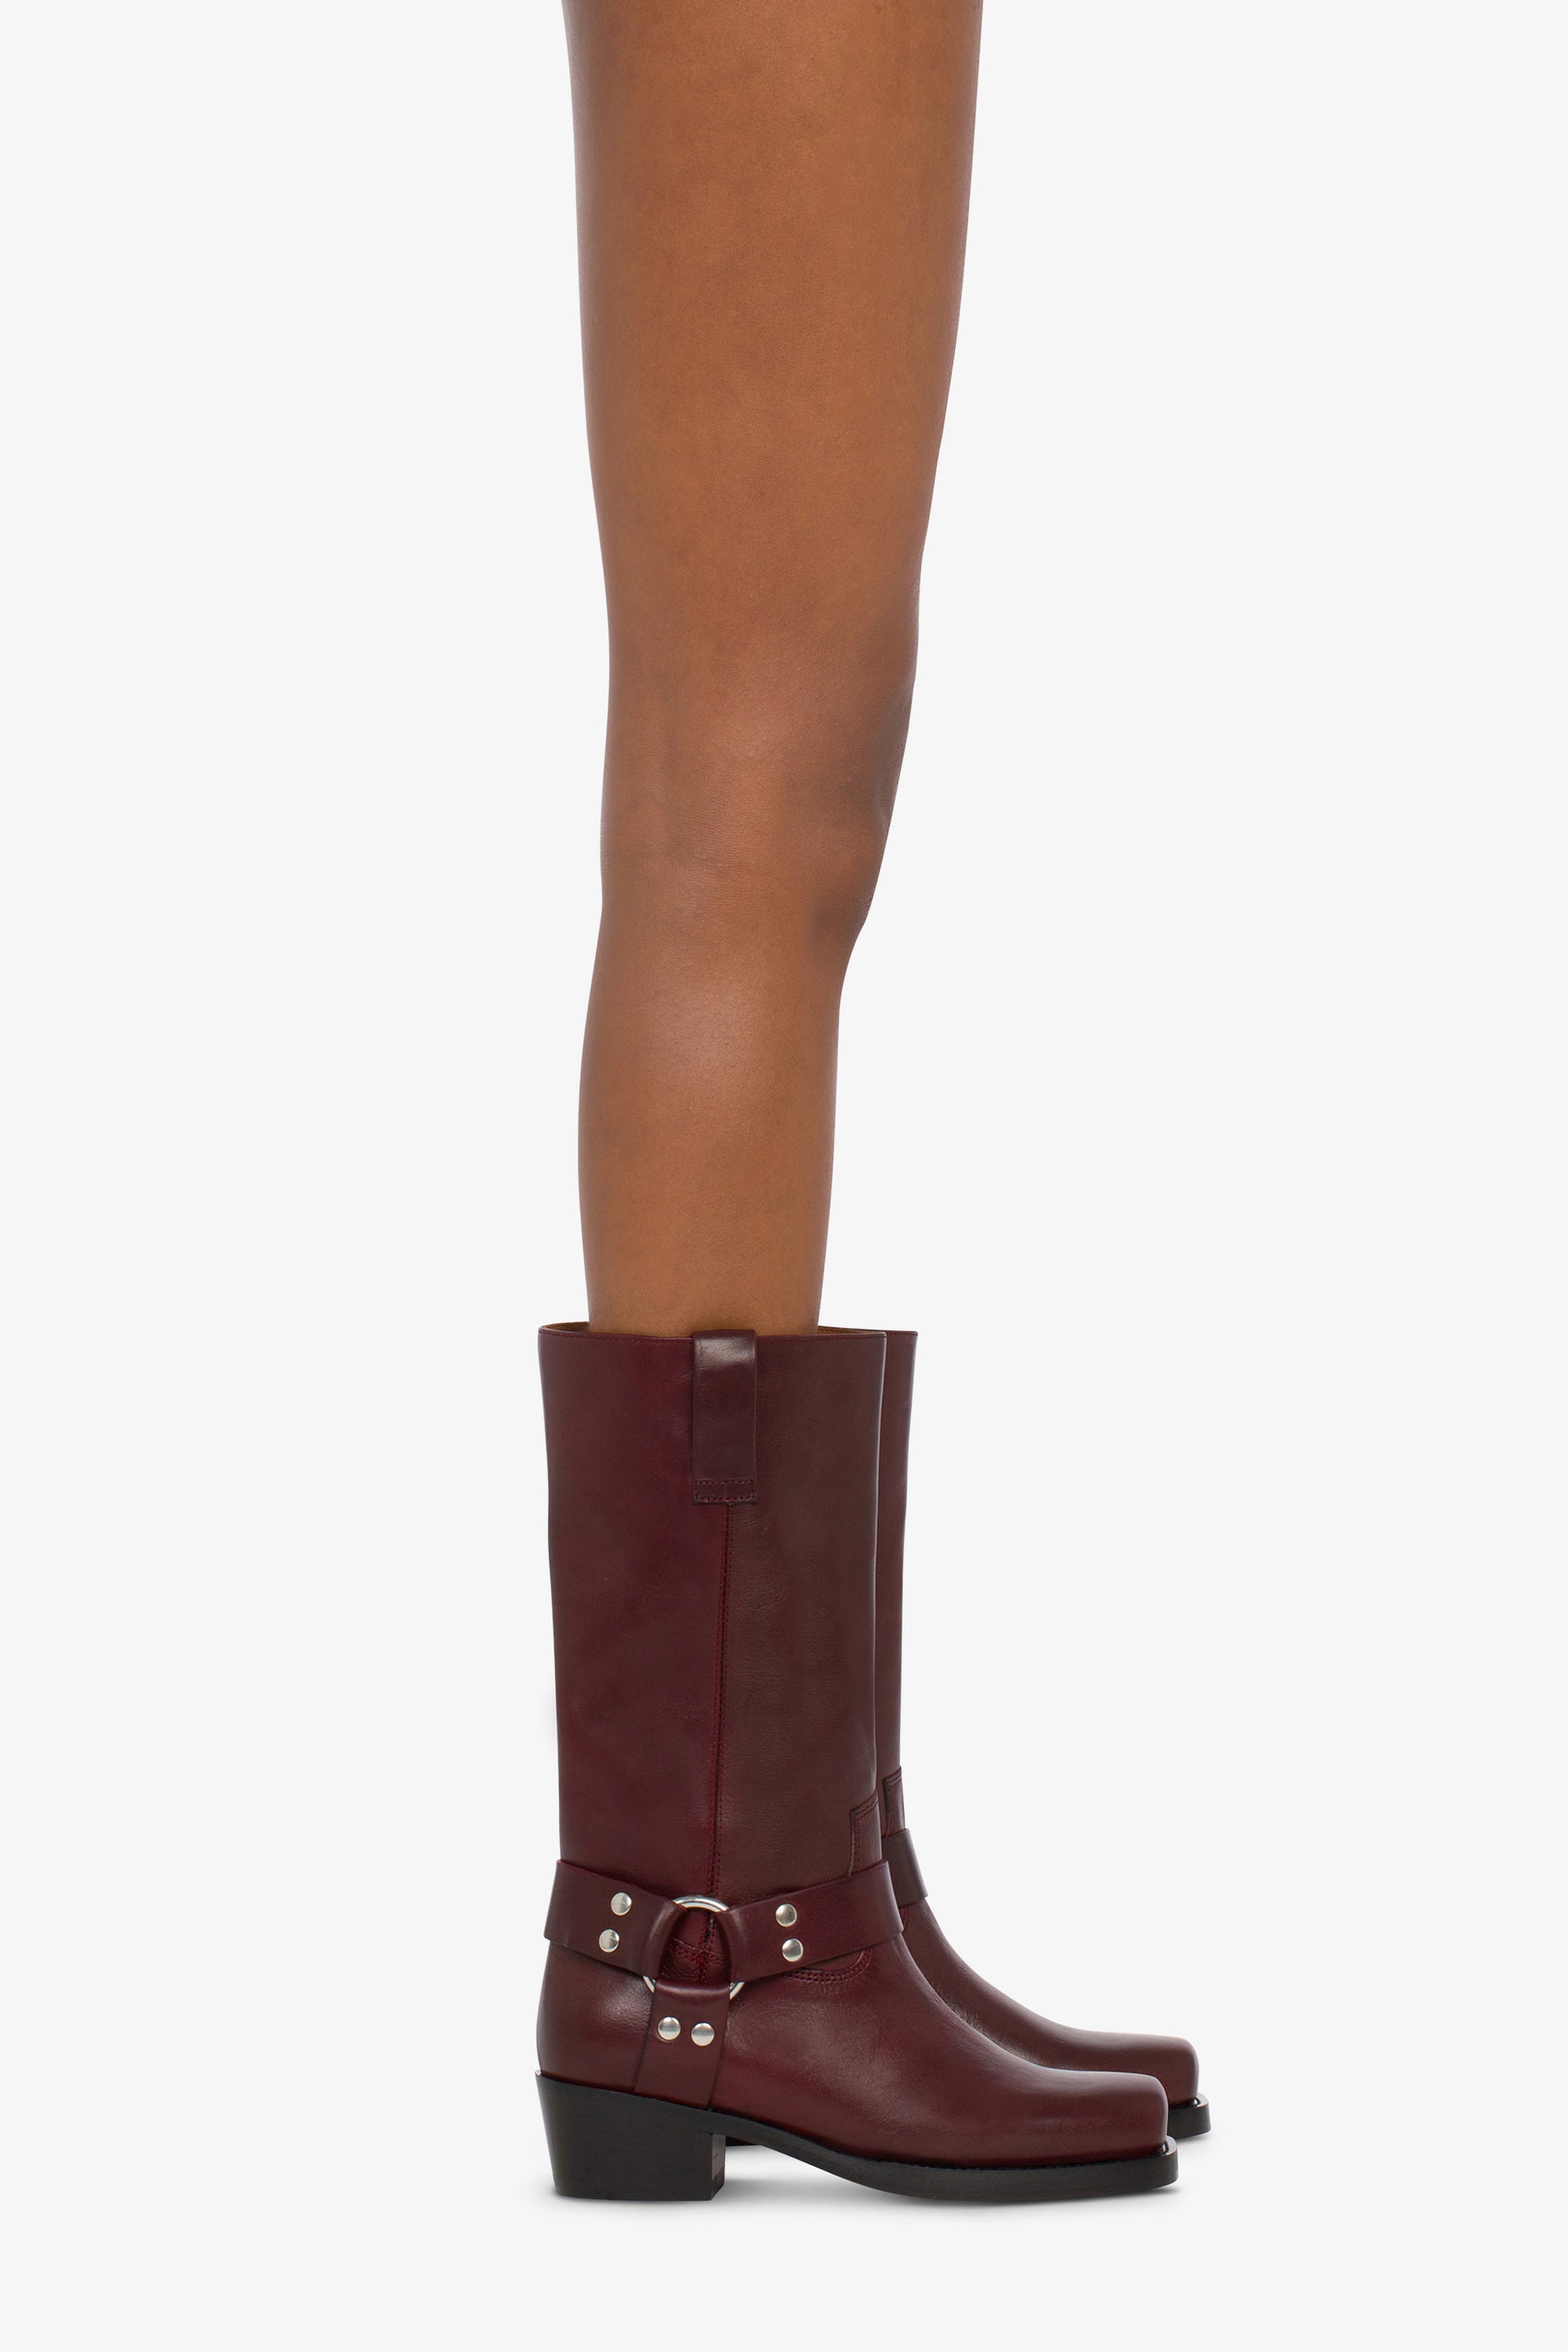 Square-toe boots in smooth plum leather - Product worn